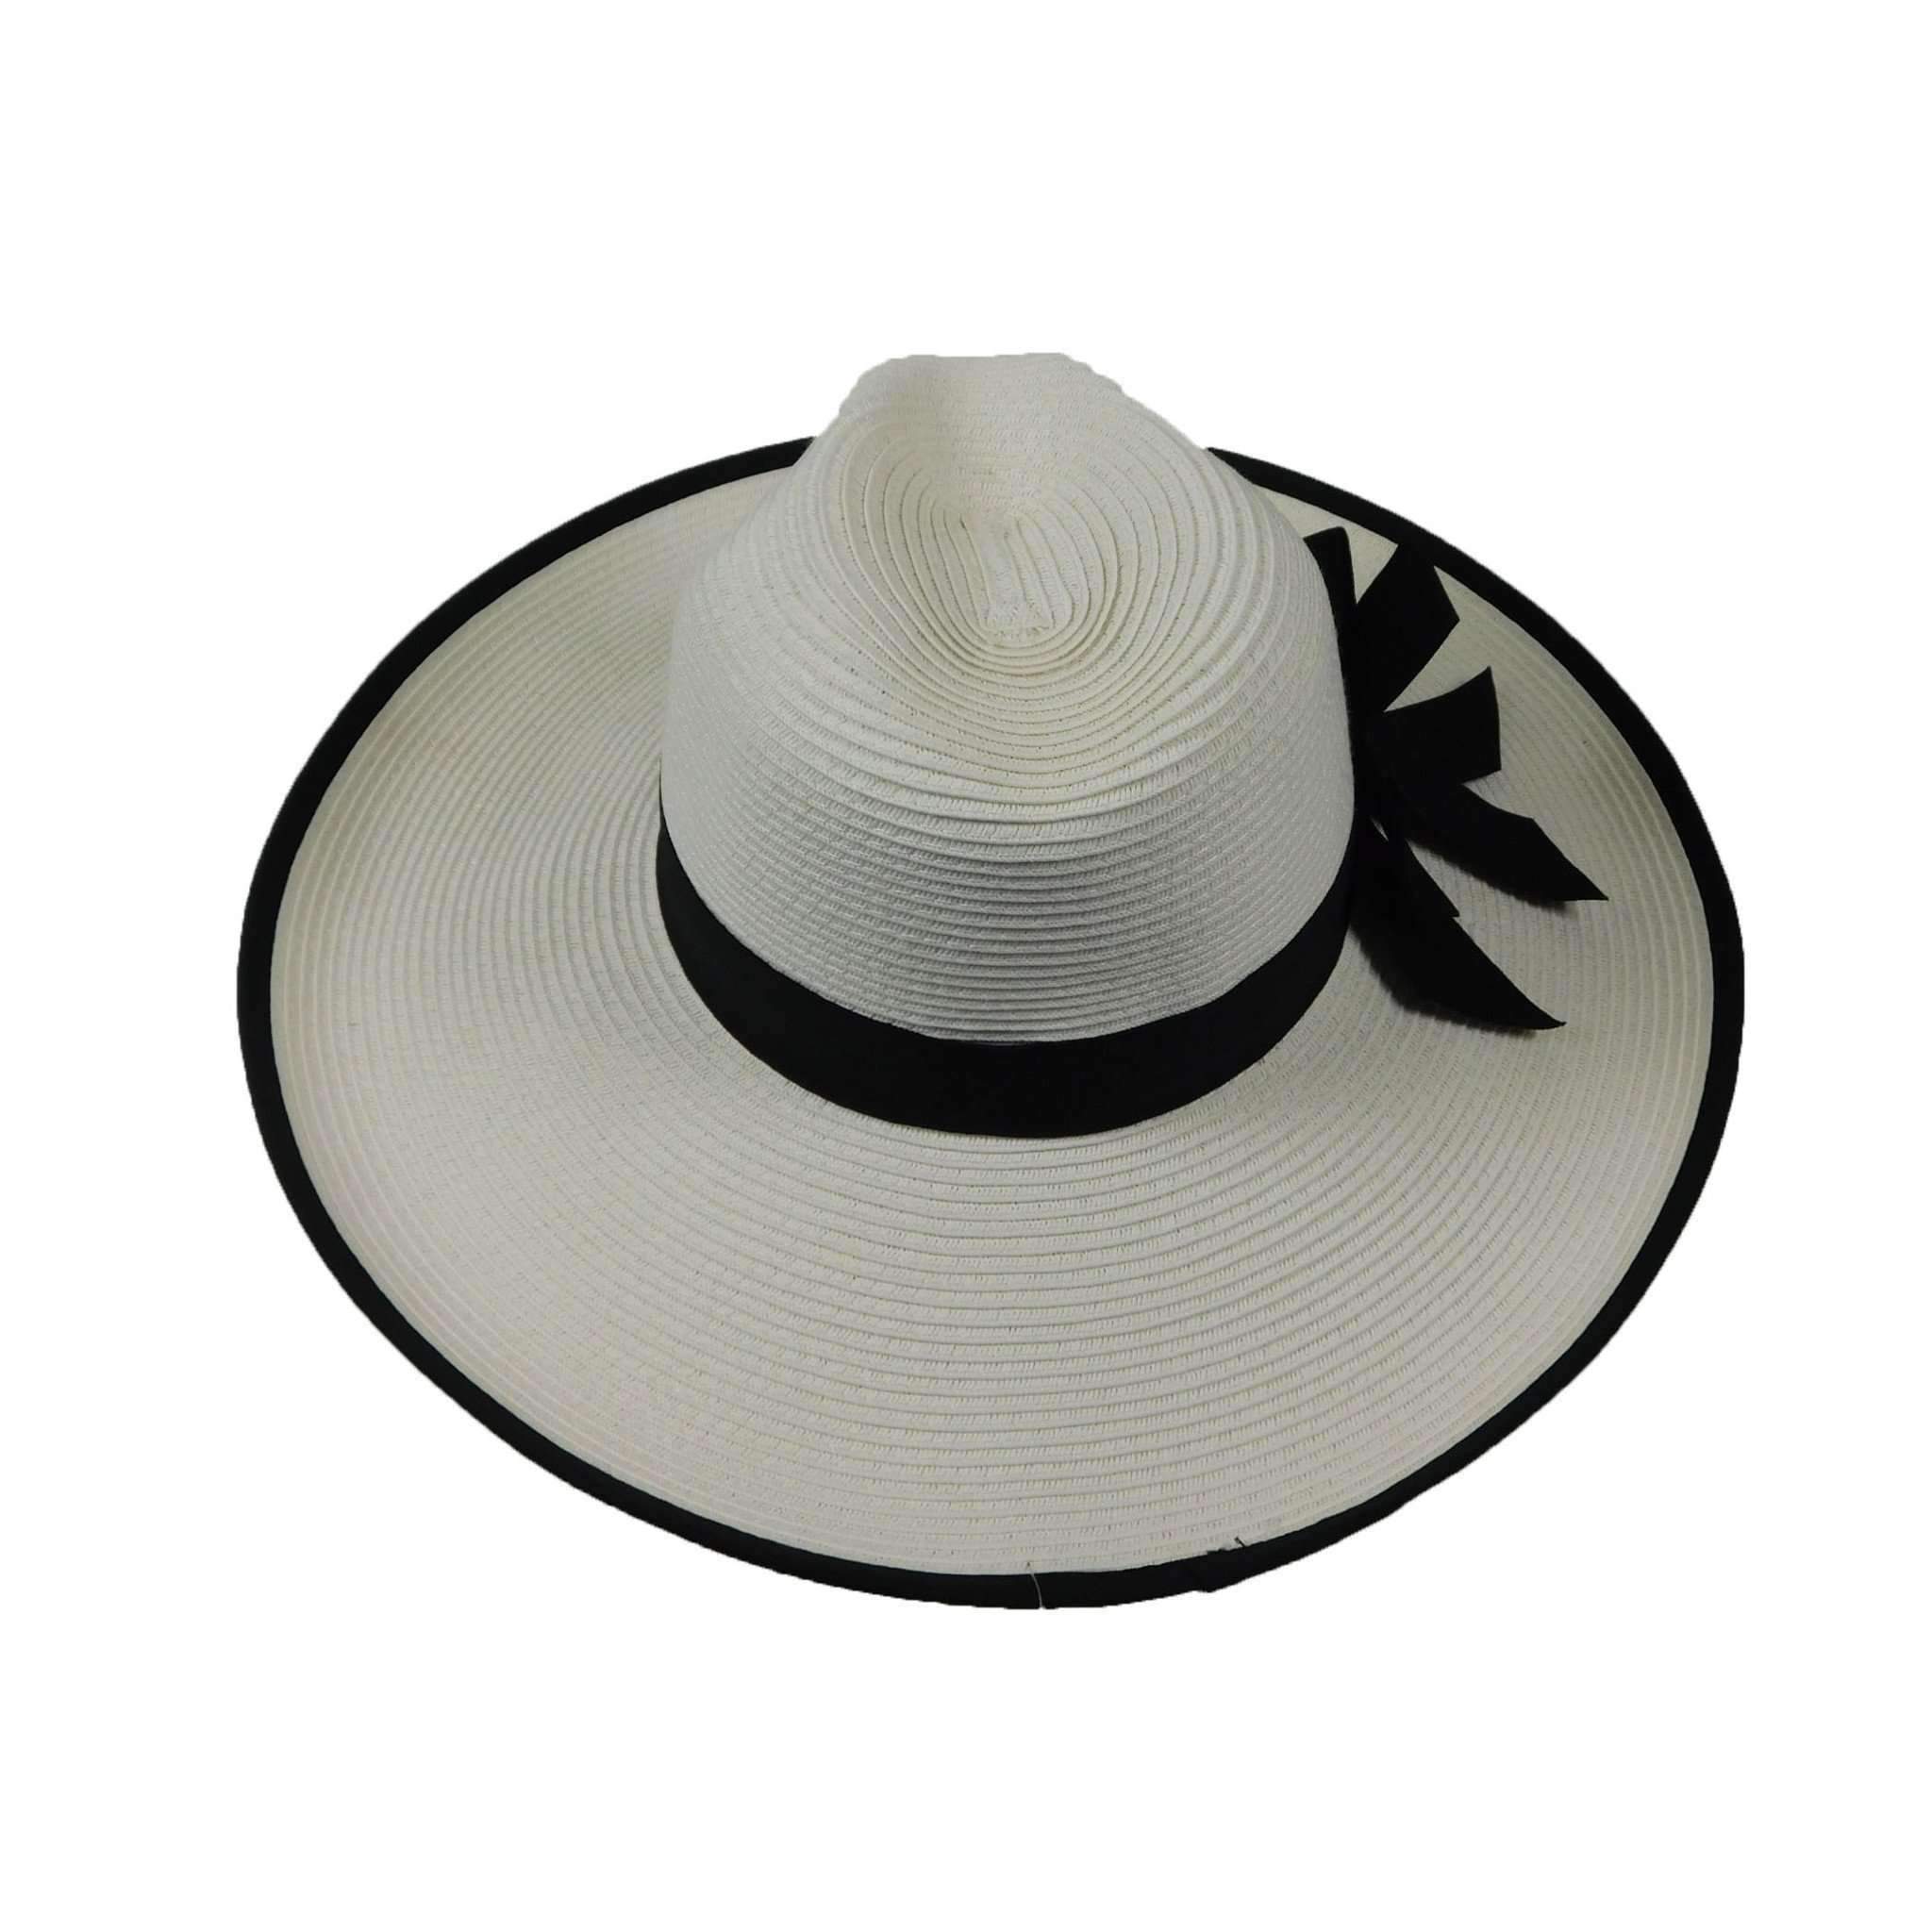 Elegant Wide Brim Straw Hat - Large and Extra-Large Size Safari Hat Jeanne Simmons    